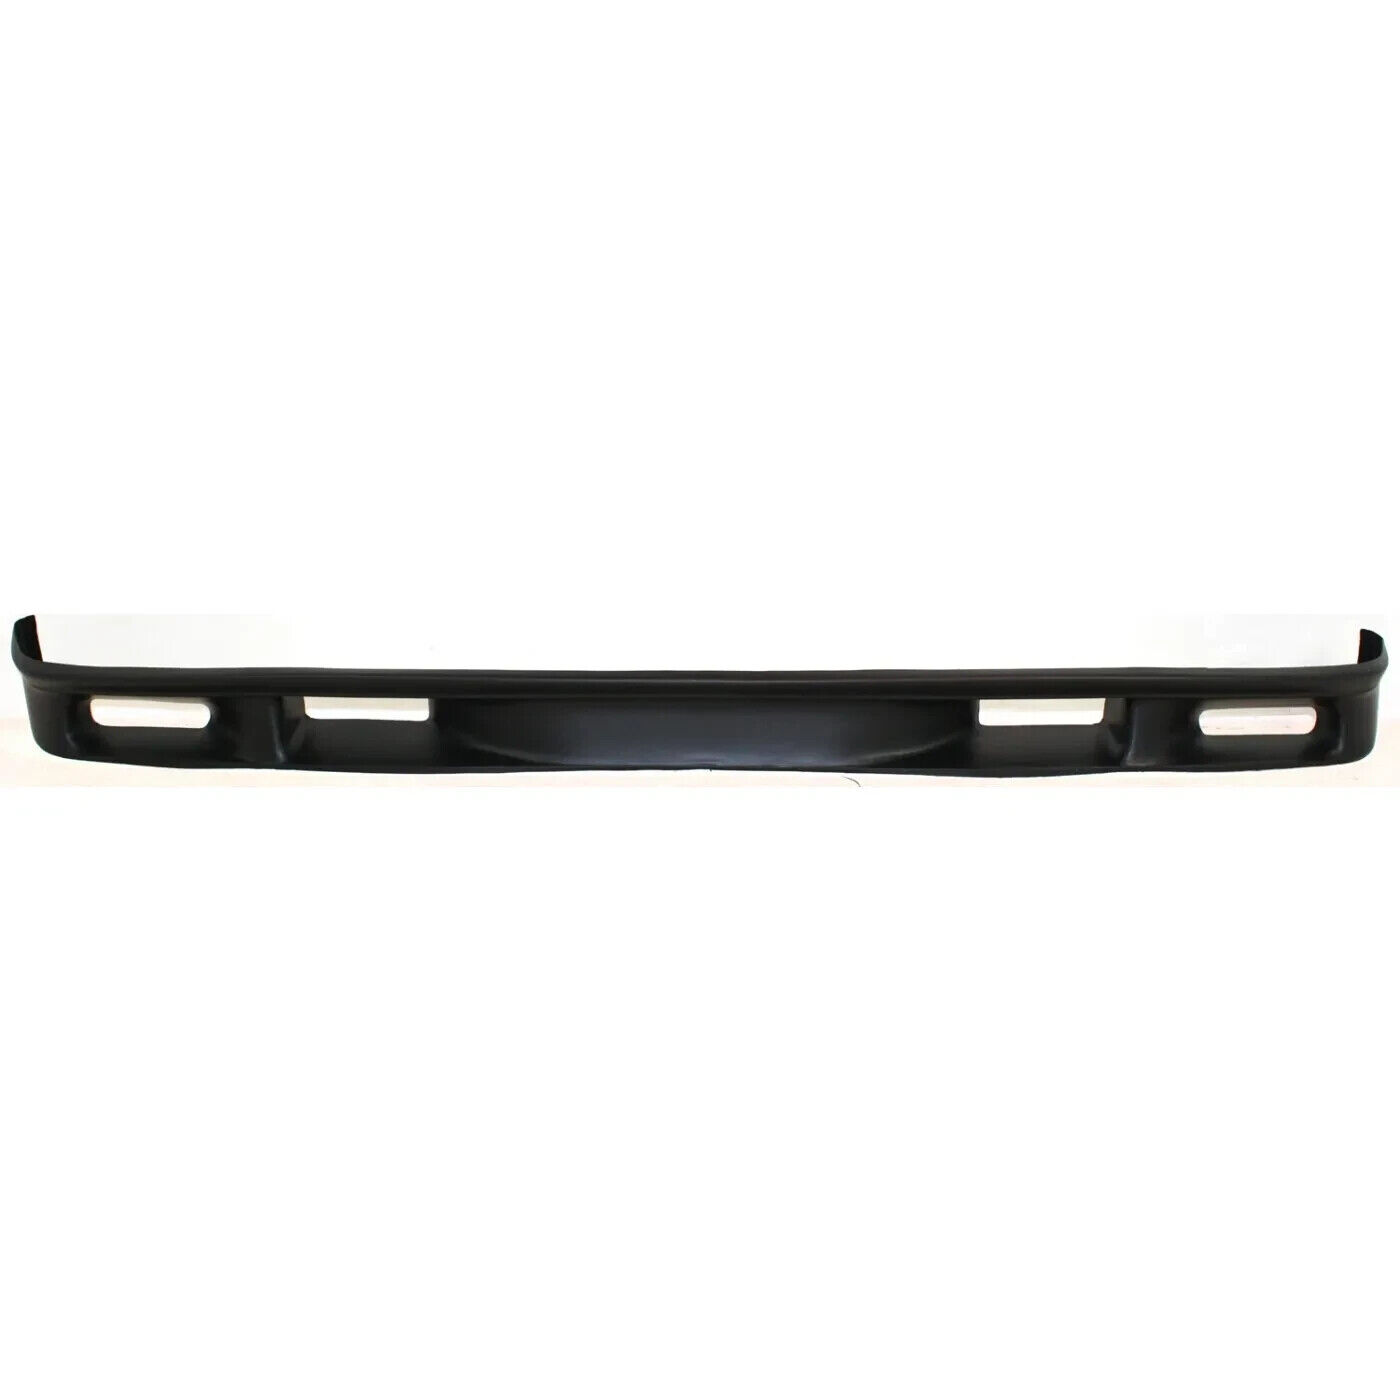 NEW Front Lower Valance For 1993-1995 Ford F-150 Lightning SHIPS TODAY